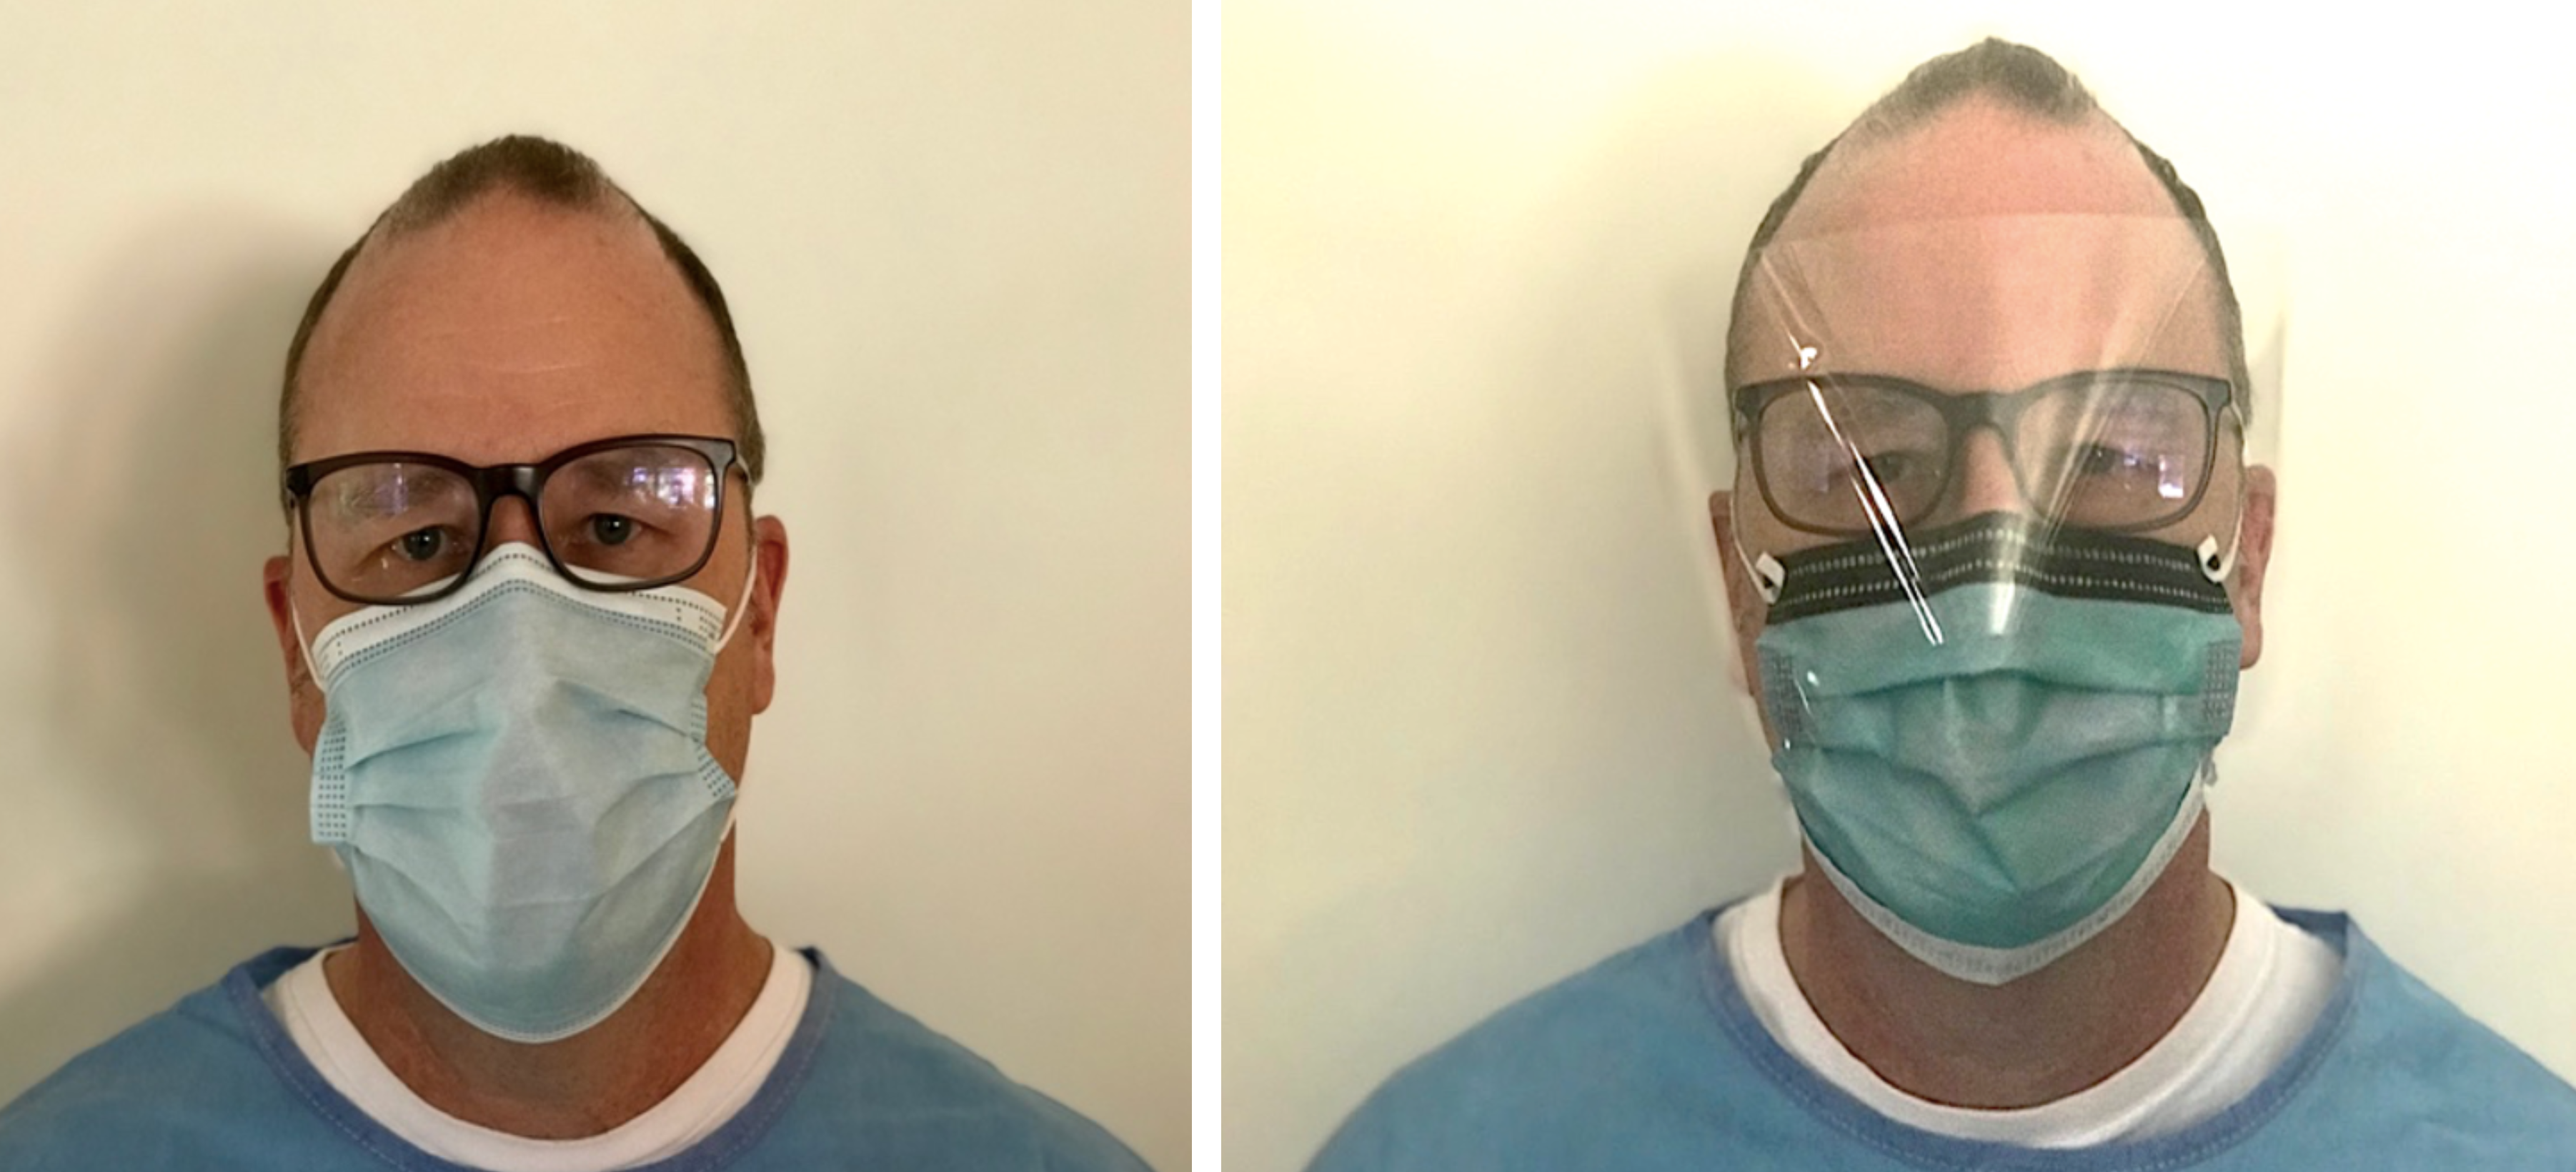 Photos showing a healthcare worker wearing a medical mask both with and without an eye shield